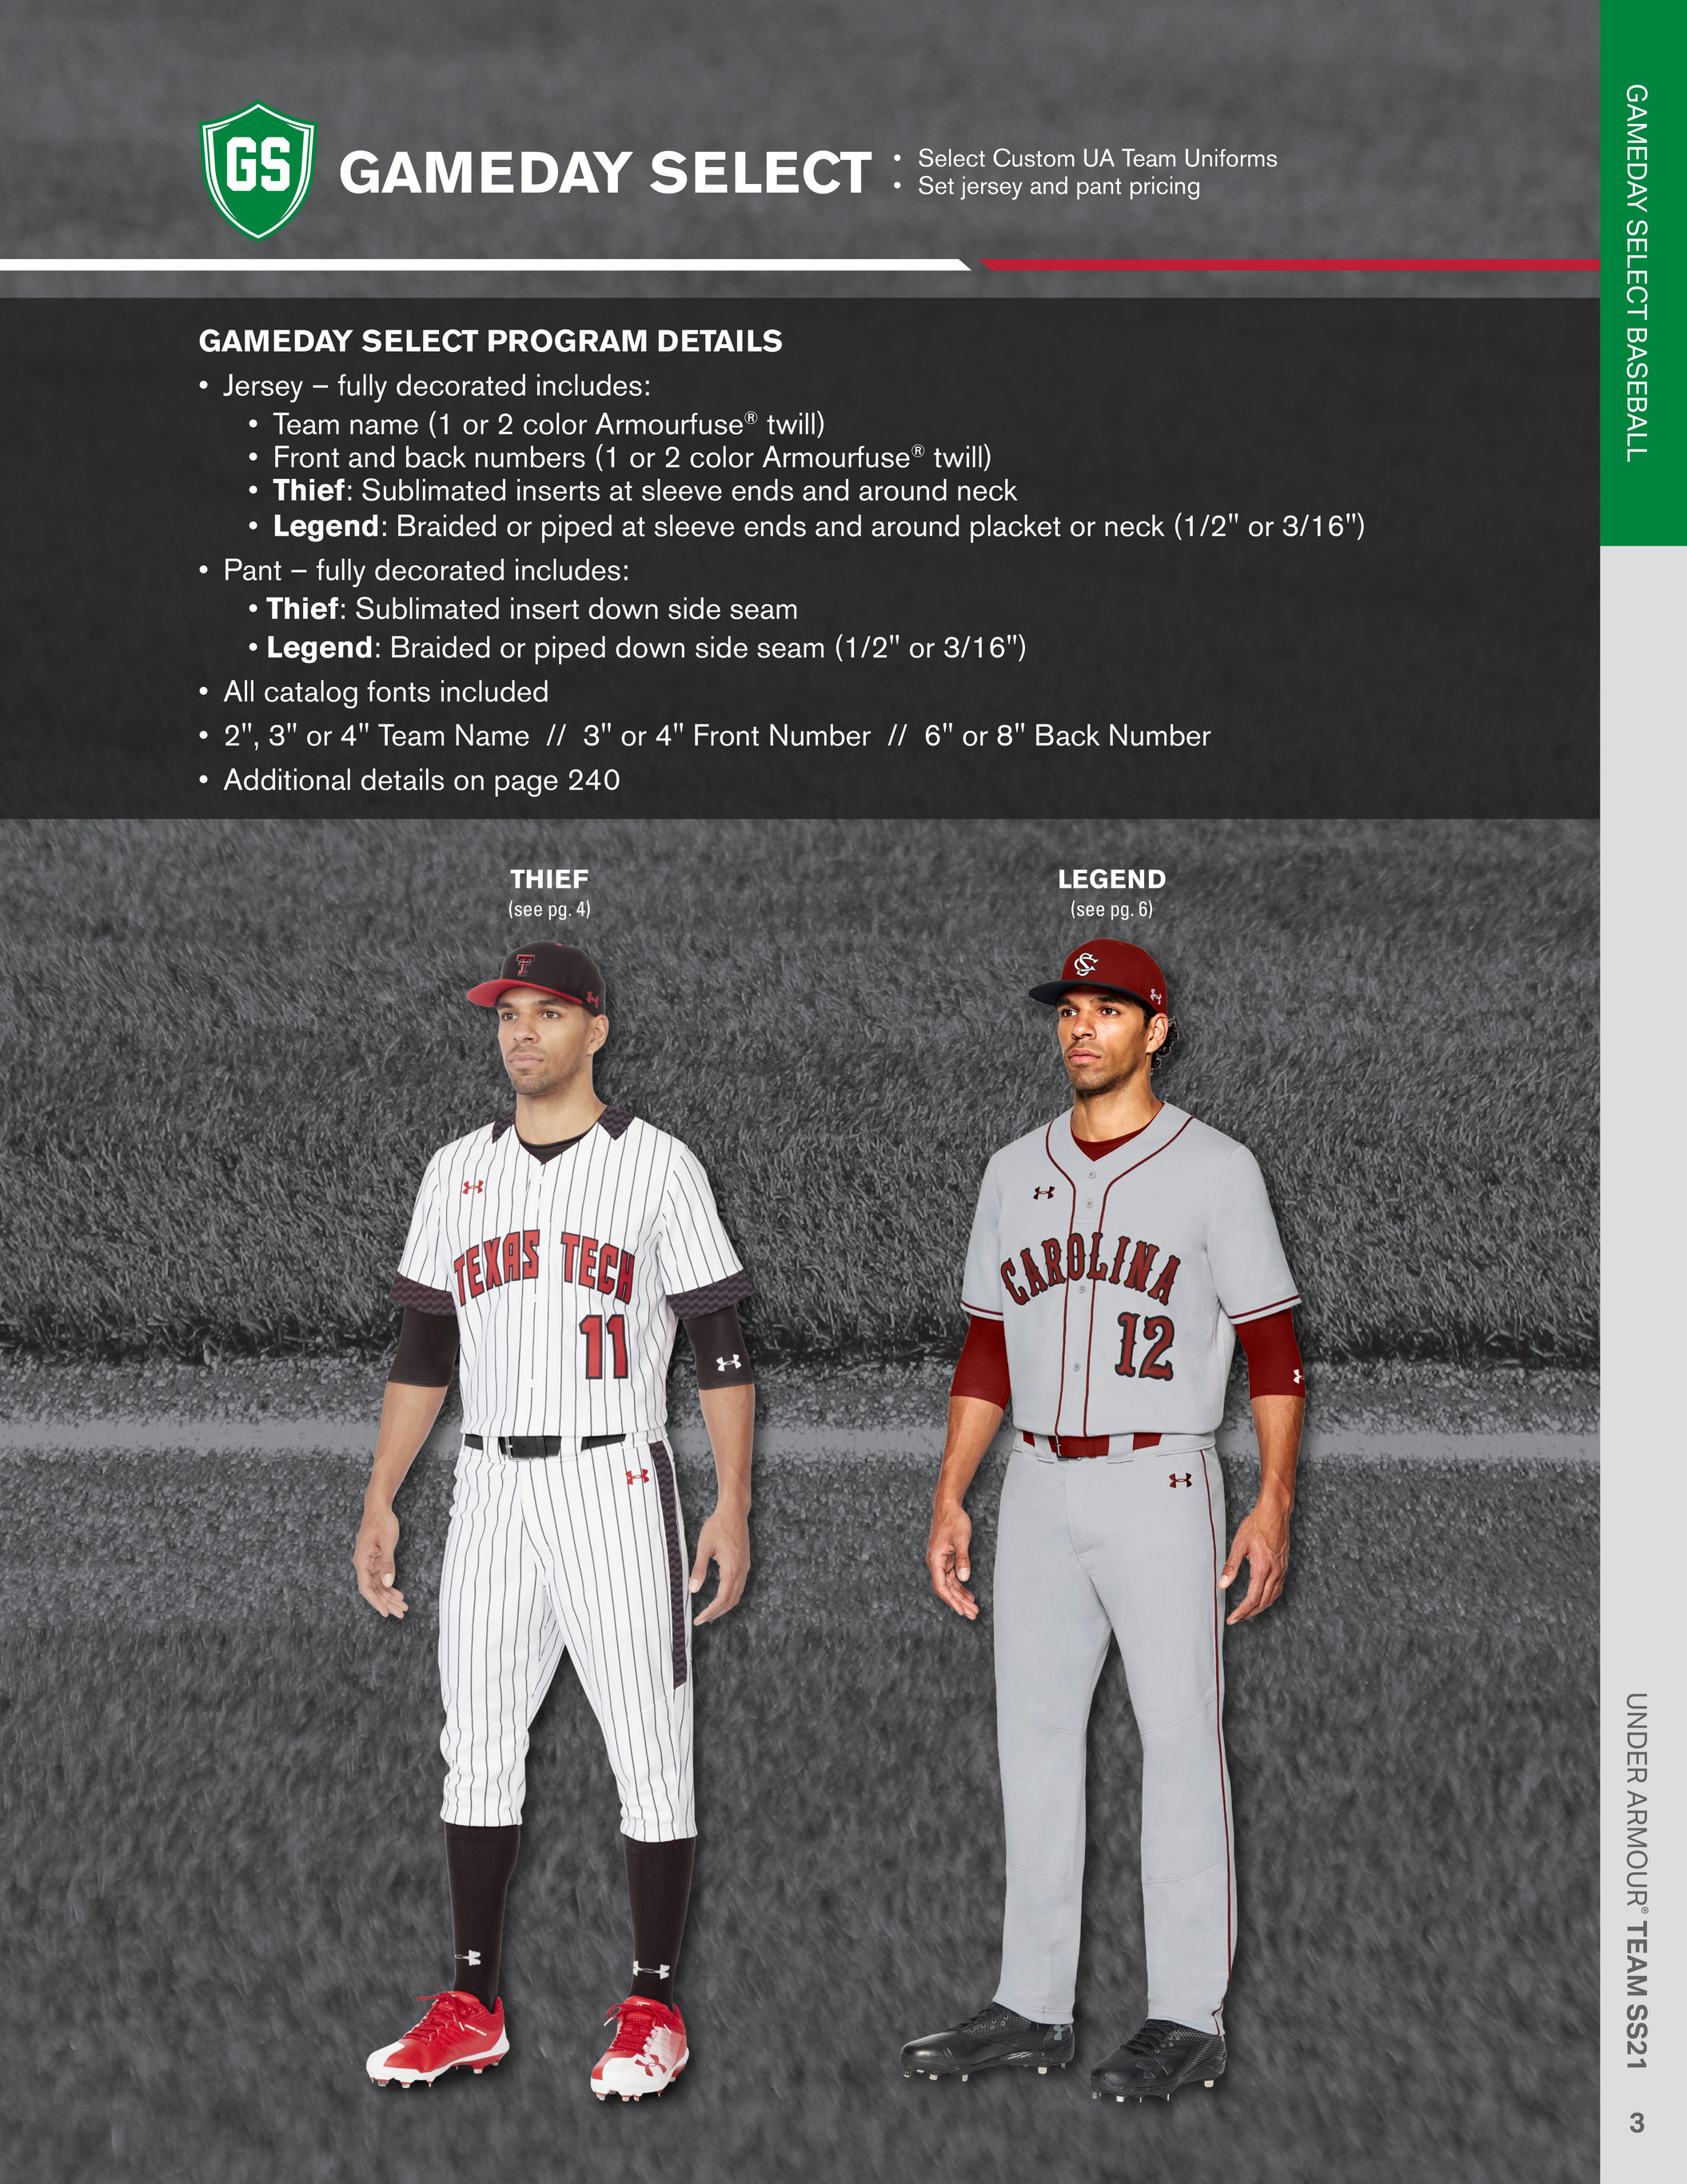 Under Armour Baseball Uniforms SS21 - Page 2-3